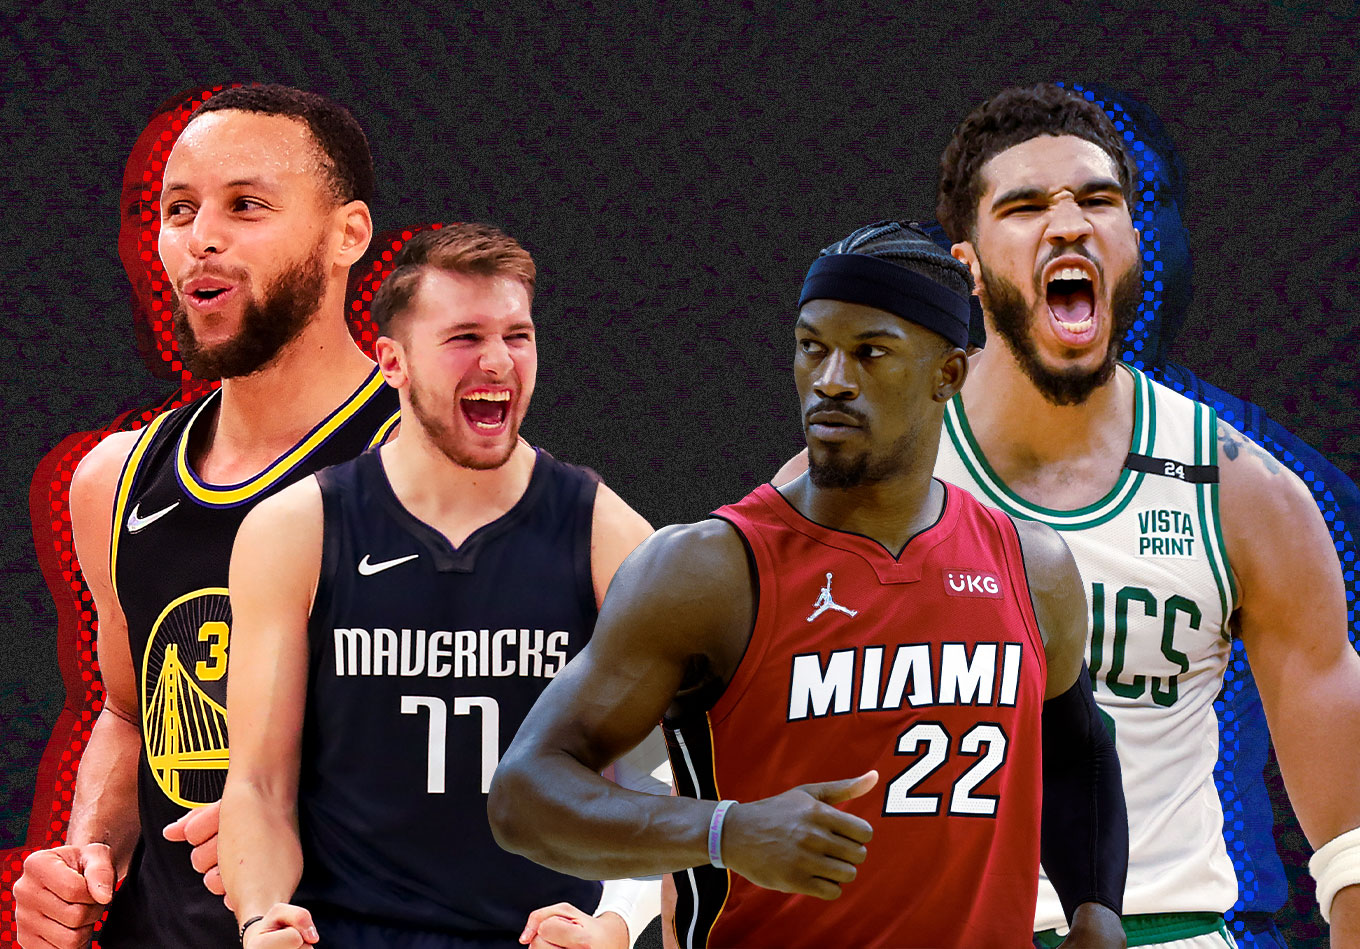 NBA Playoffs: What to Watch for as Four Teams Vie for a Trip to the Finals